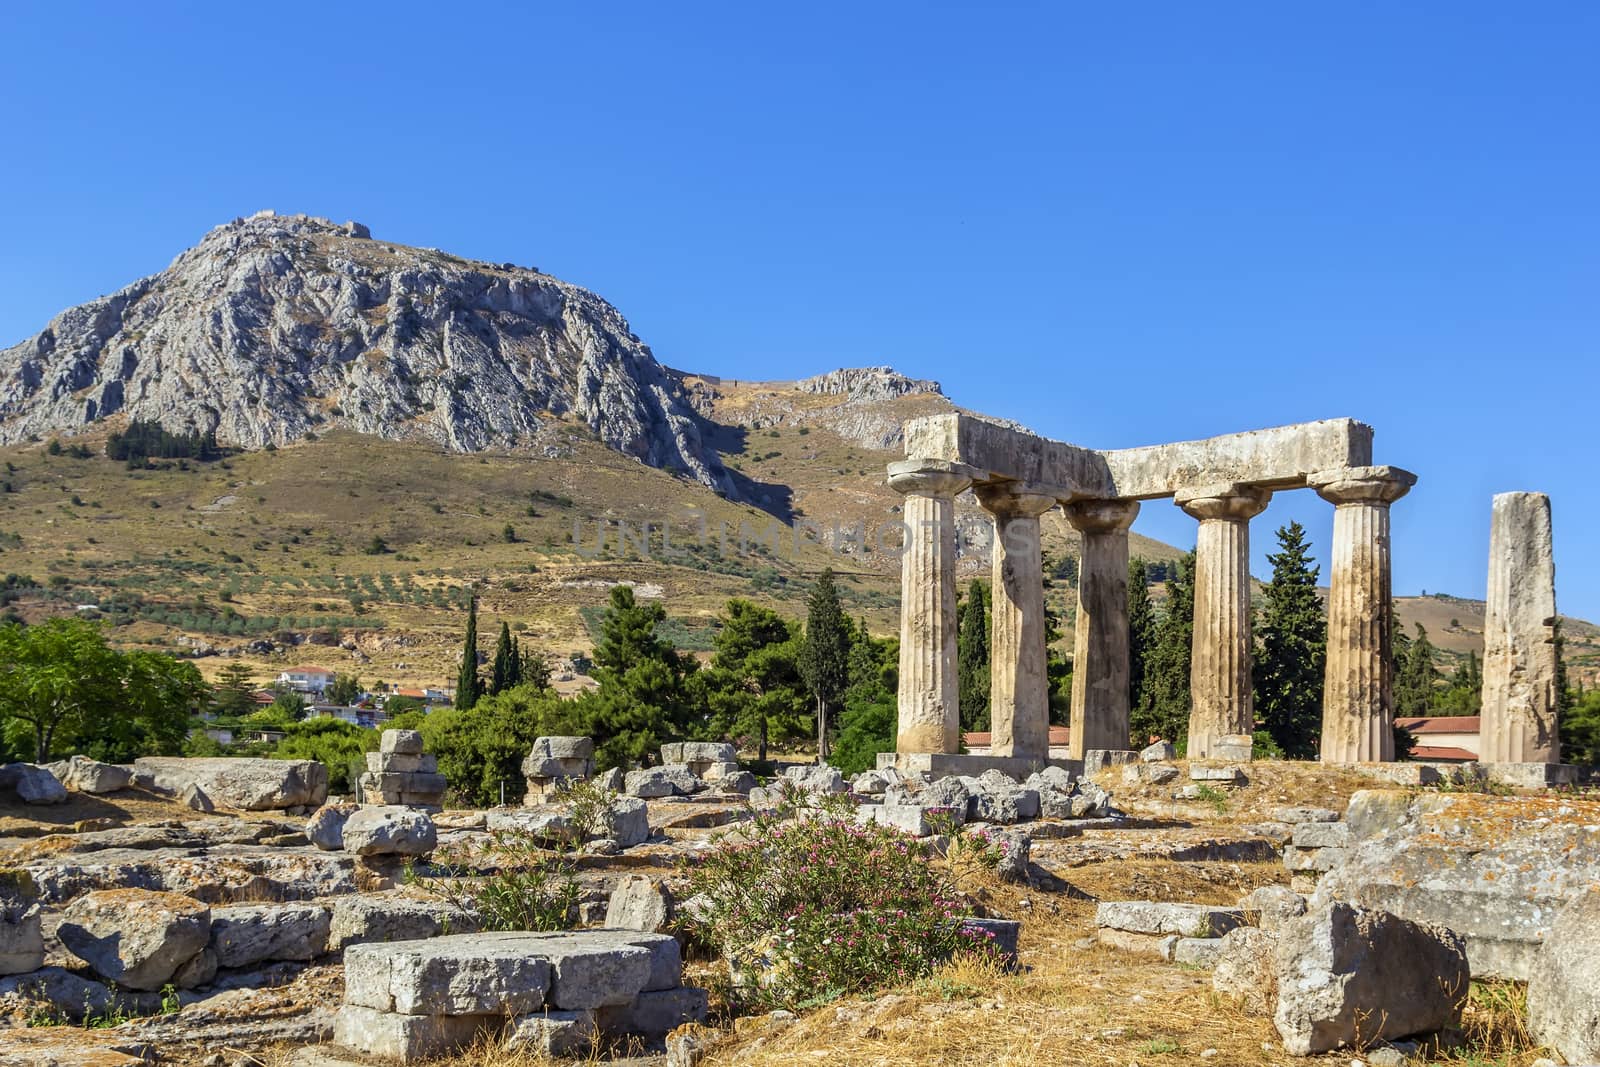 The ruins of the Temple of Apollo in ancient Corinth, Greece